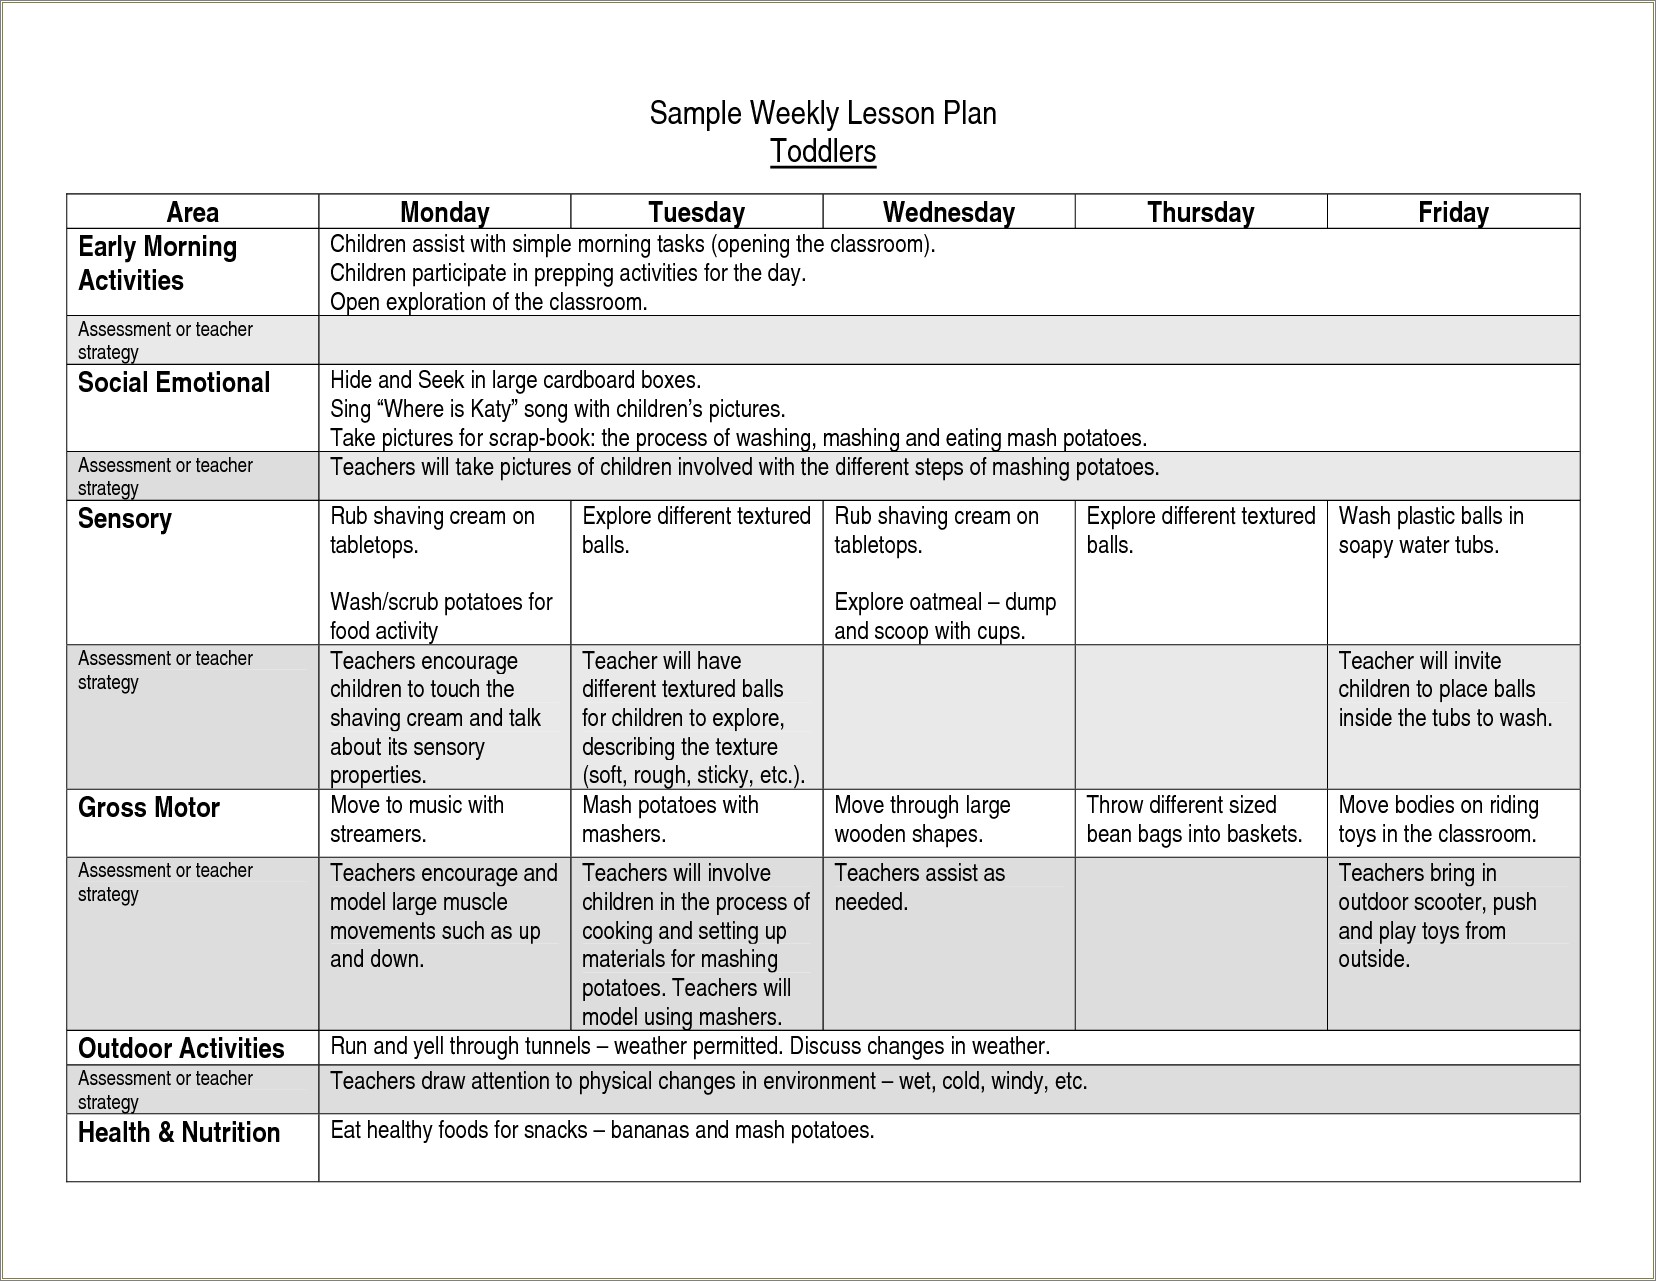 Free Excel Weekly Lesson Plan Template